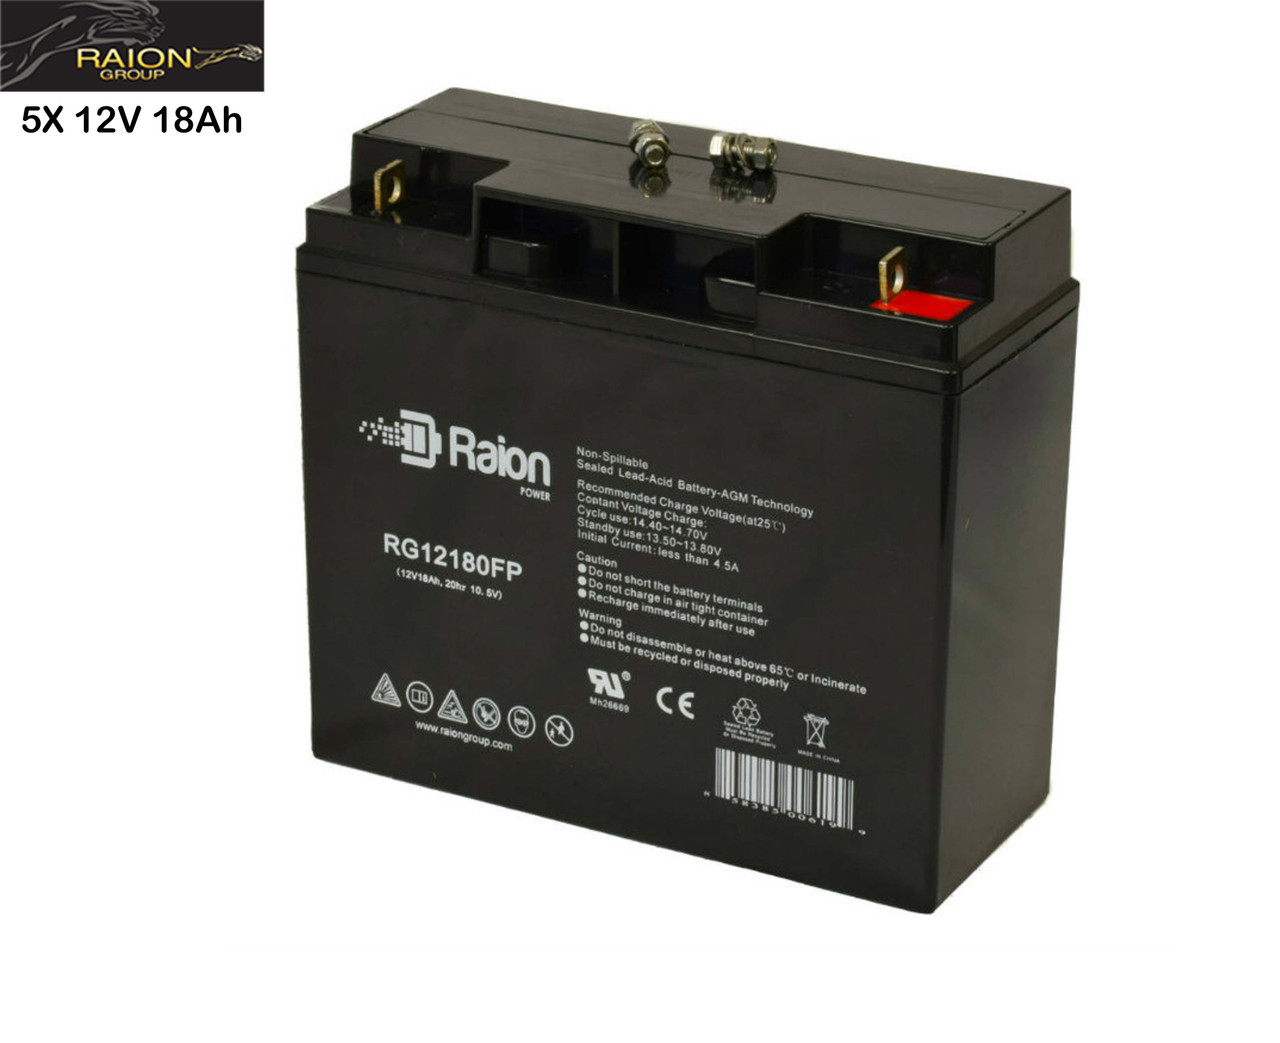 Raion Power Replacement 12V 18Ah Battery for Luyuan MH8-BS6020-S5 - 5 Pack